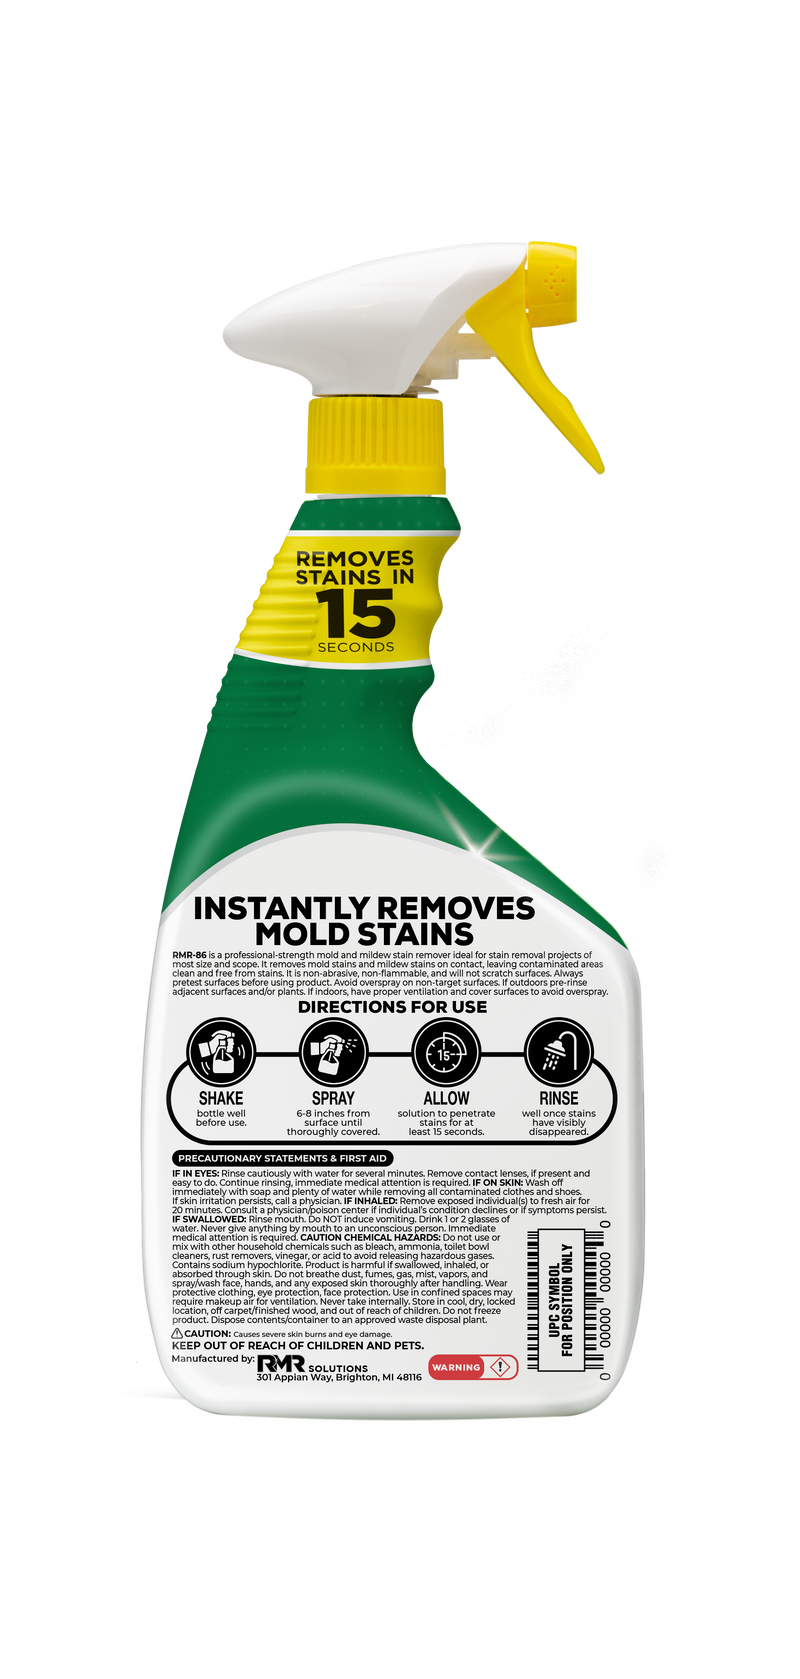 Load image into Gallery viewer, RMR-86® Instant Mold &amp; Mildew Stain Remover
